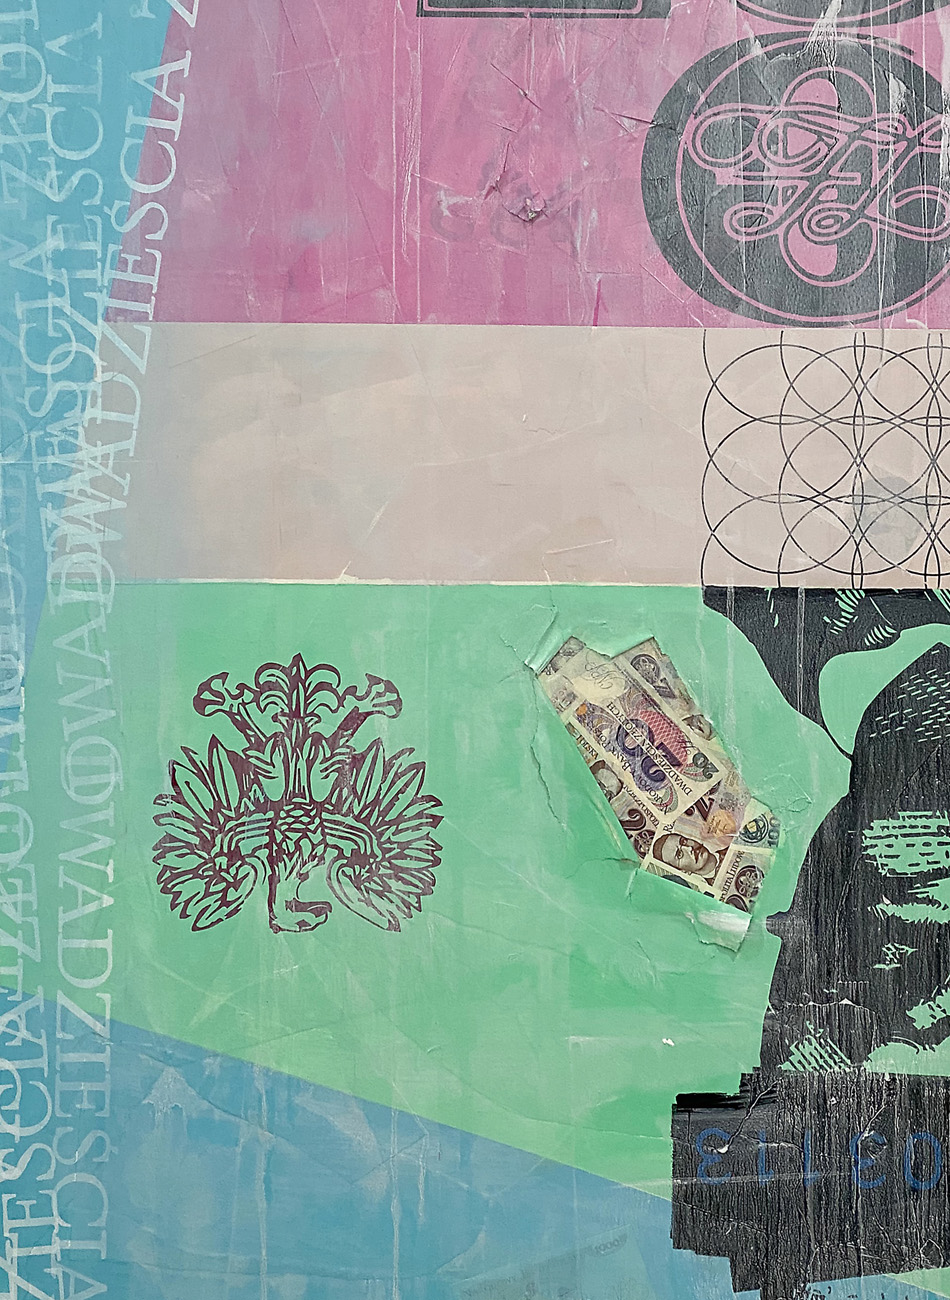 Preview of painter, Brian Drake's new work, featuring old money and obsolete currency.